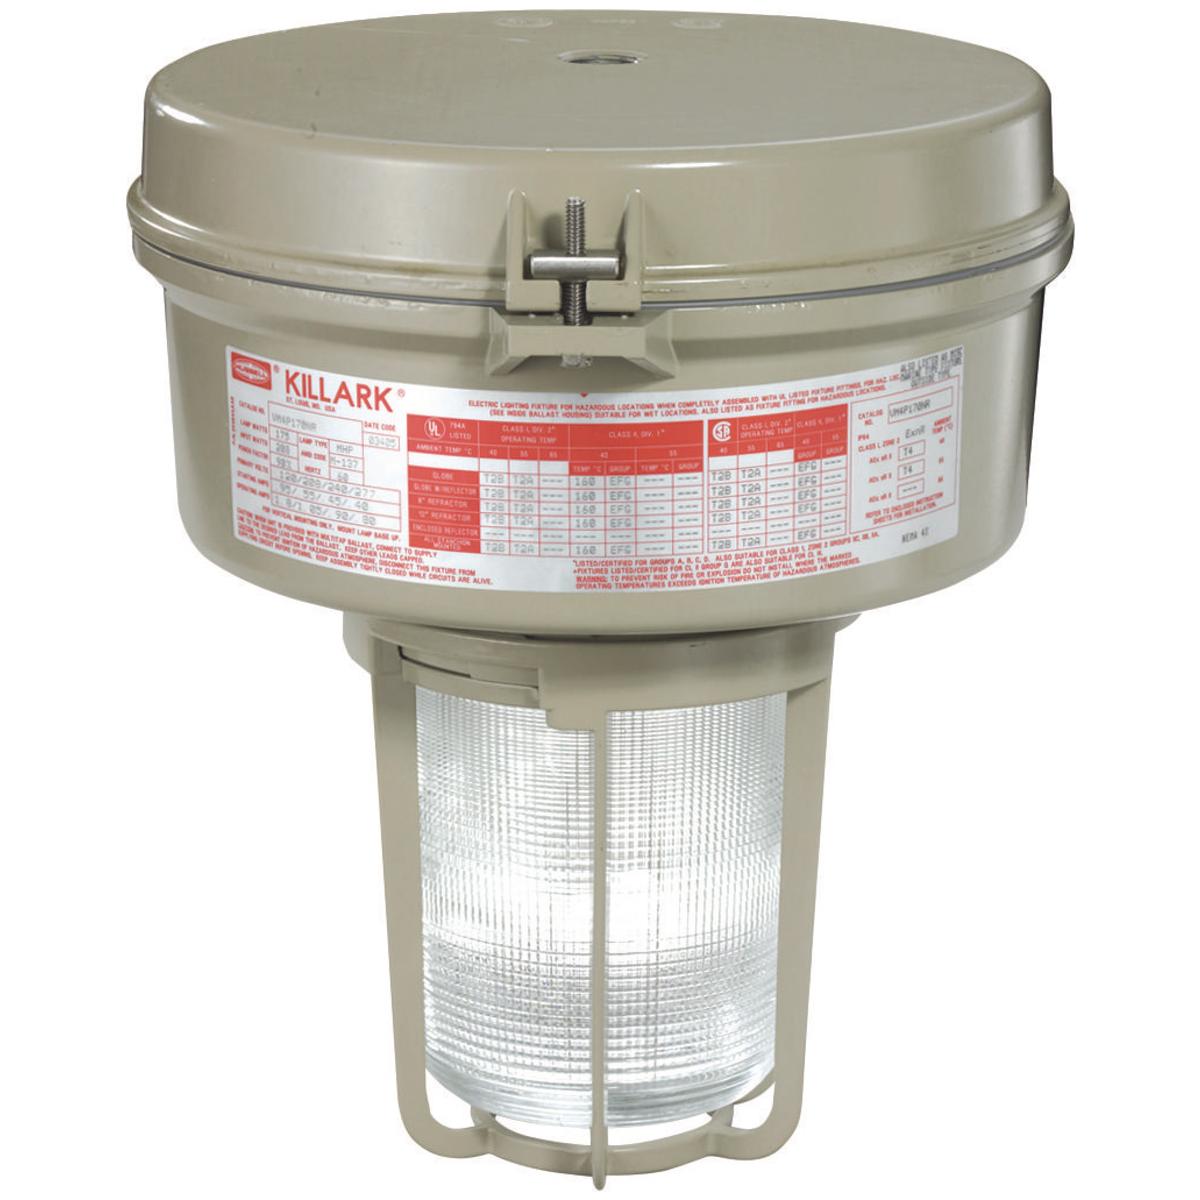 Hubbell VM3P175F2R1G VM3 Series - 175W Metal Halide 480V - 3/4" Flexible Pendant - Type I Glass Refractor and Guard  ; Ballast tank and splice box – corrosion resistant copper-free aluminum alloy with baked powder epoxy/polyester finish, electrostatically applied for complete